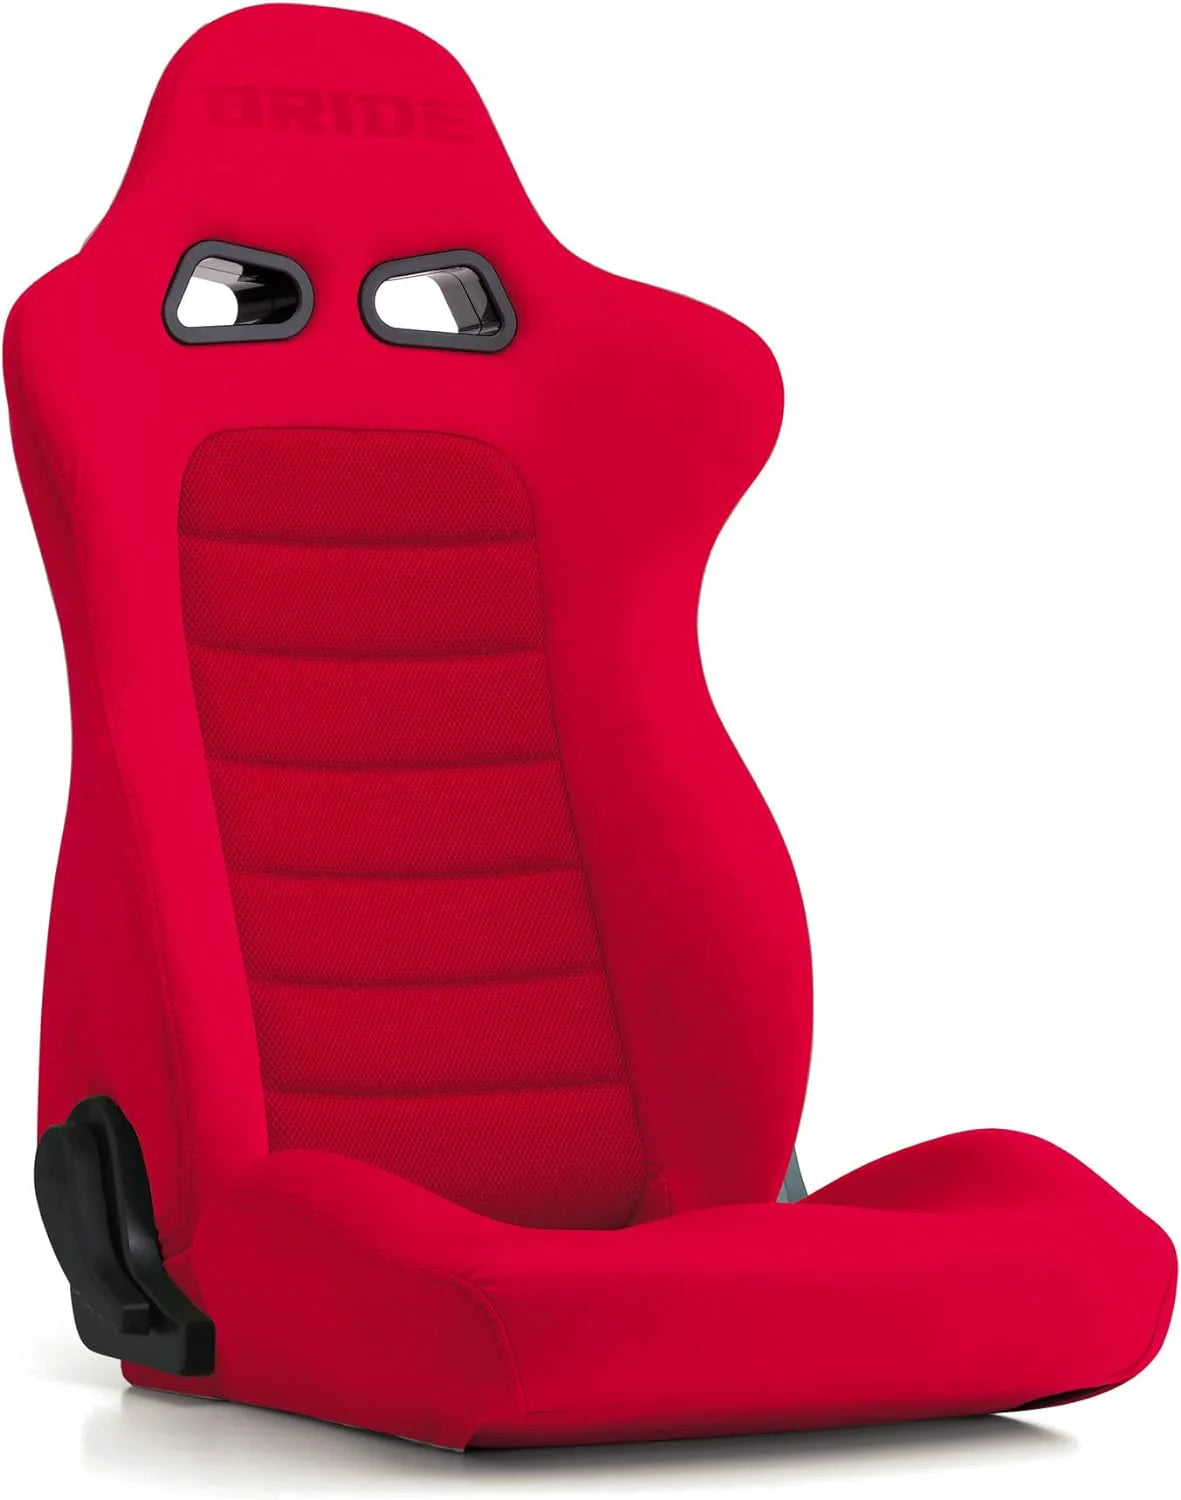 Bride Euroster II Cruz Seat In Red (armrest not included)